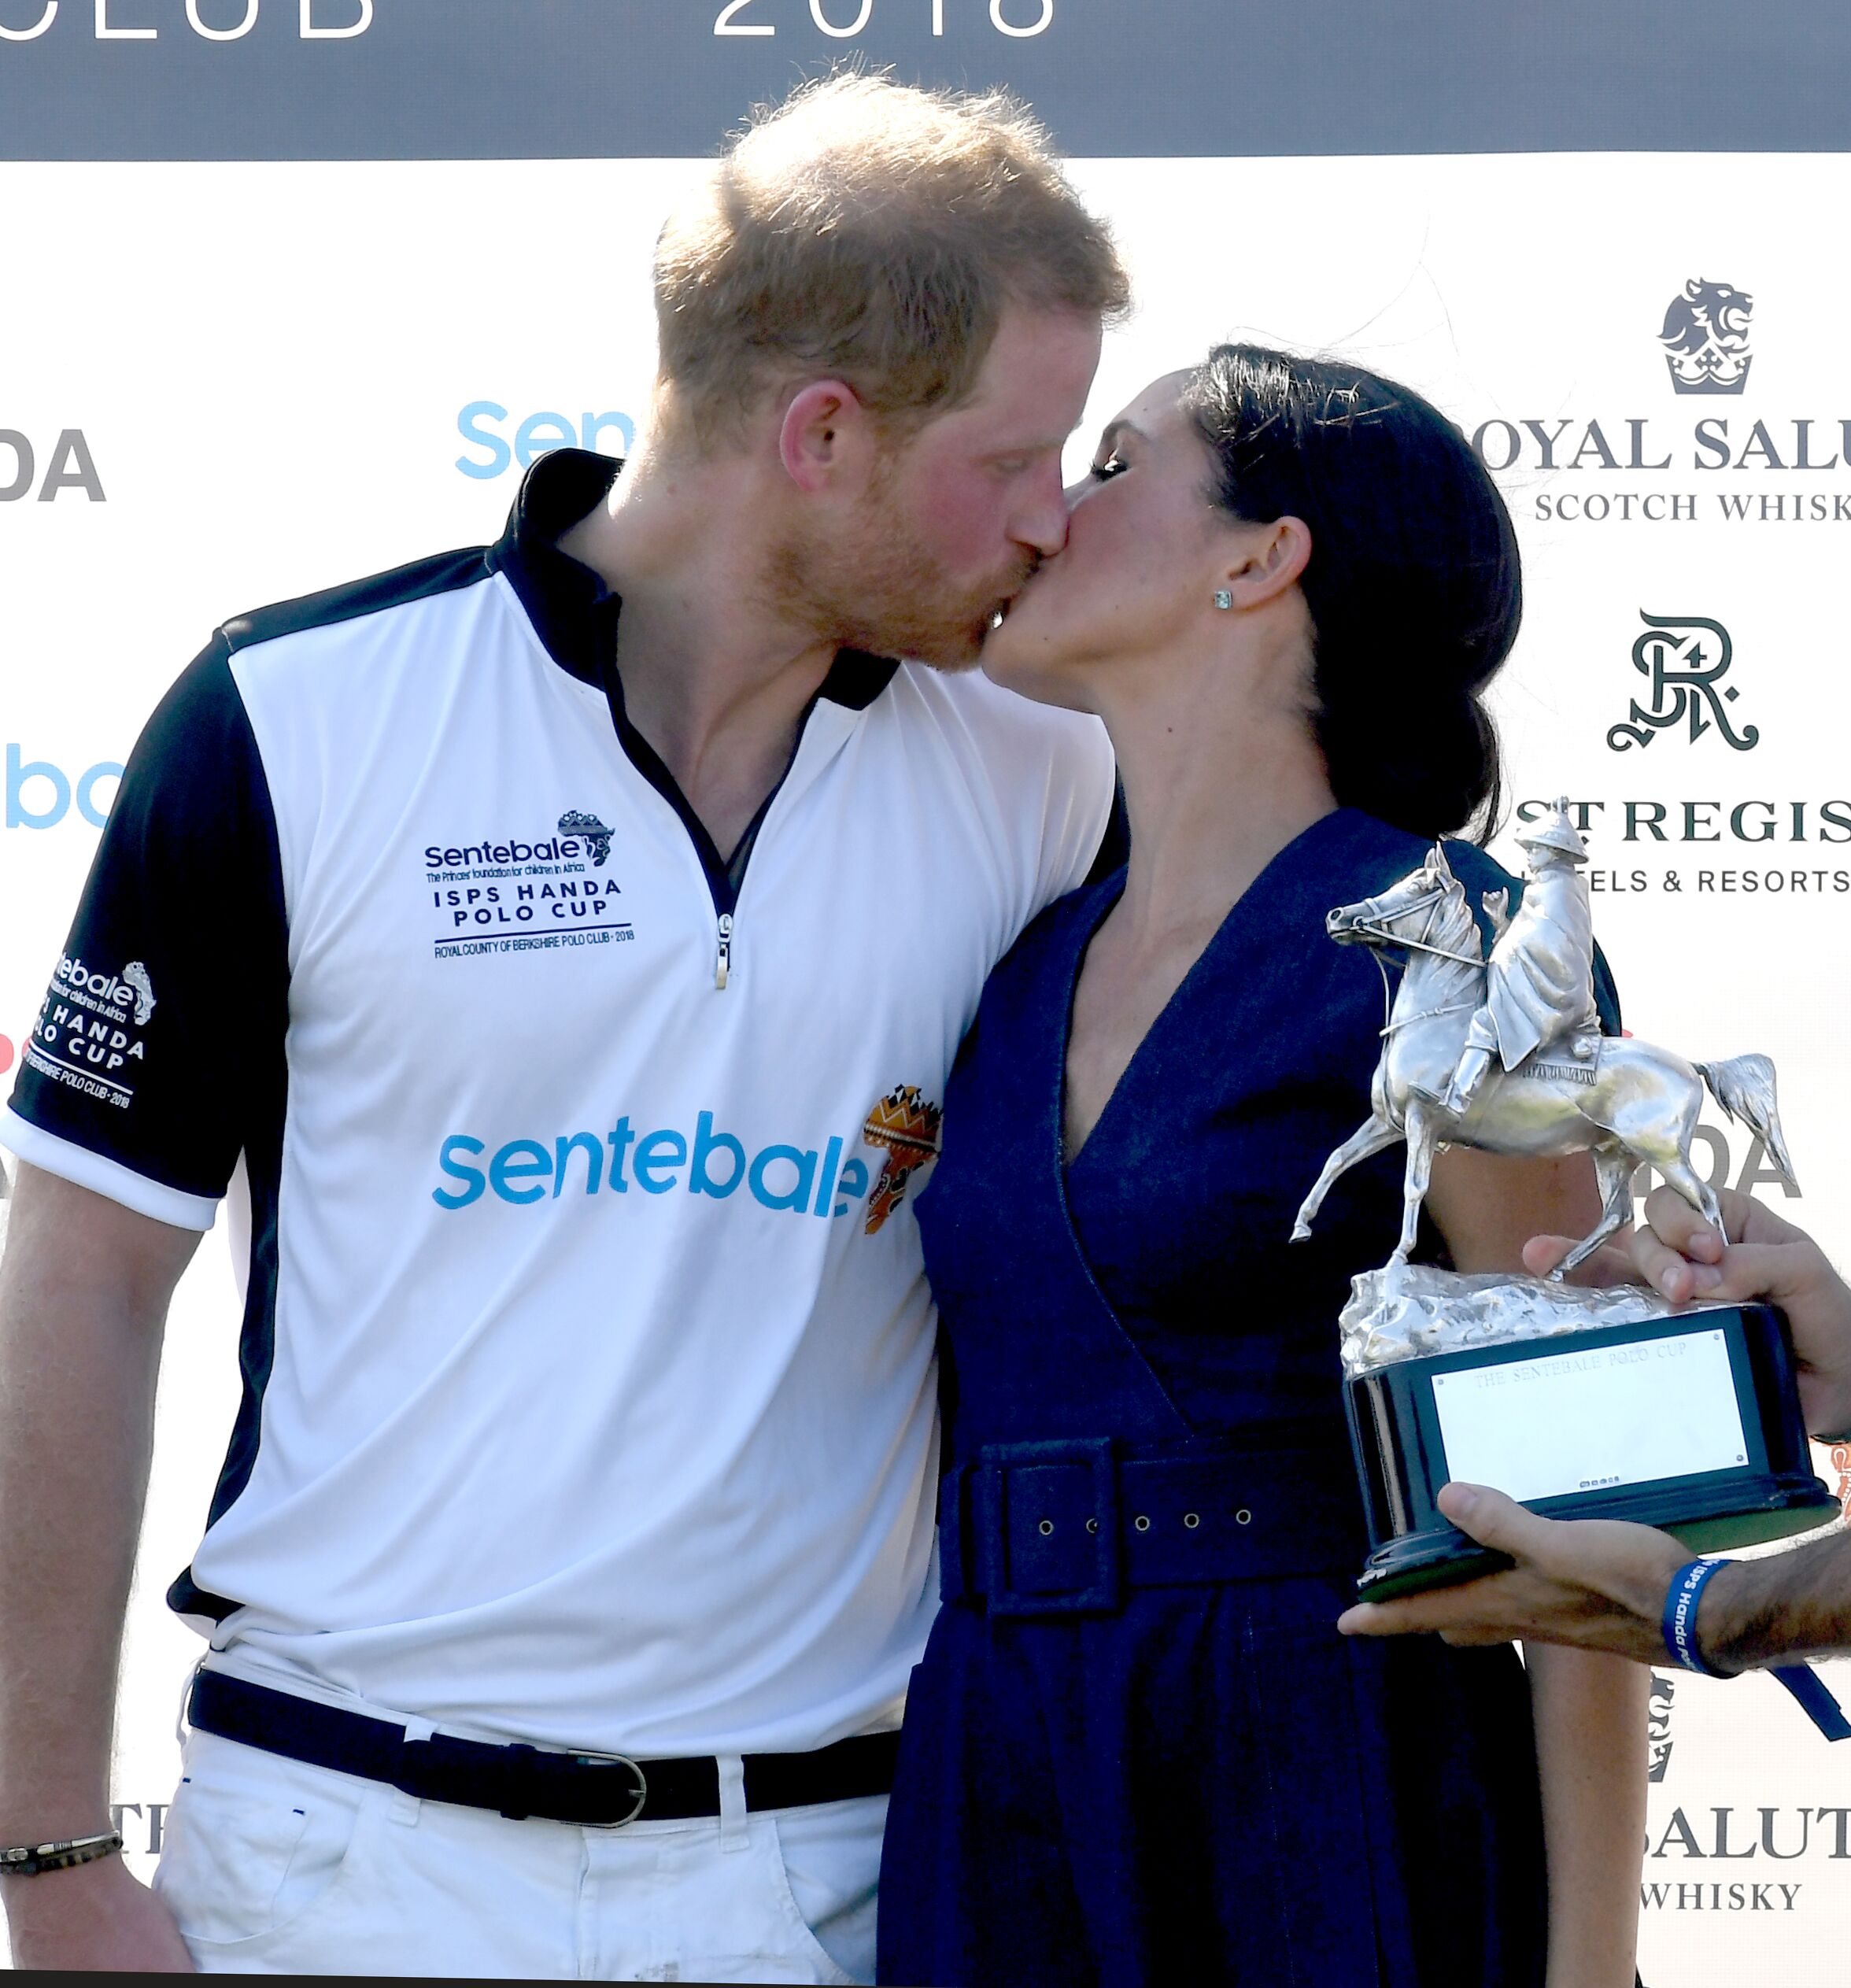 Prince Harry and Duchess Meghan kiss as they pose with the trophy after the Sentebale ISPS Handa Polo on July 26, 2018, in Windsor, England | Photo: Anwar Hussein/WireImage/Getty Images